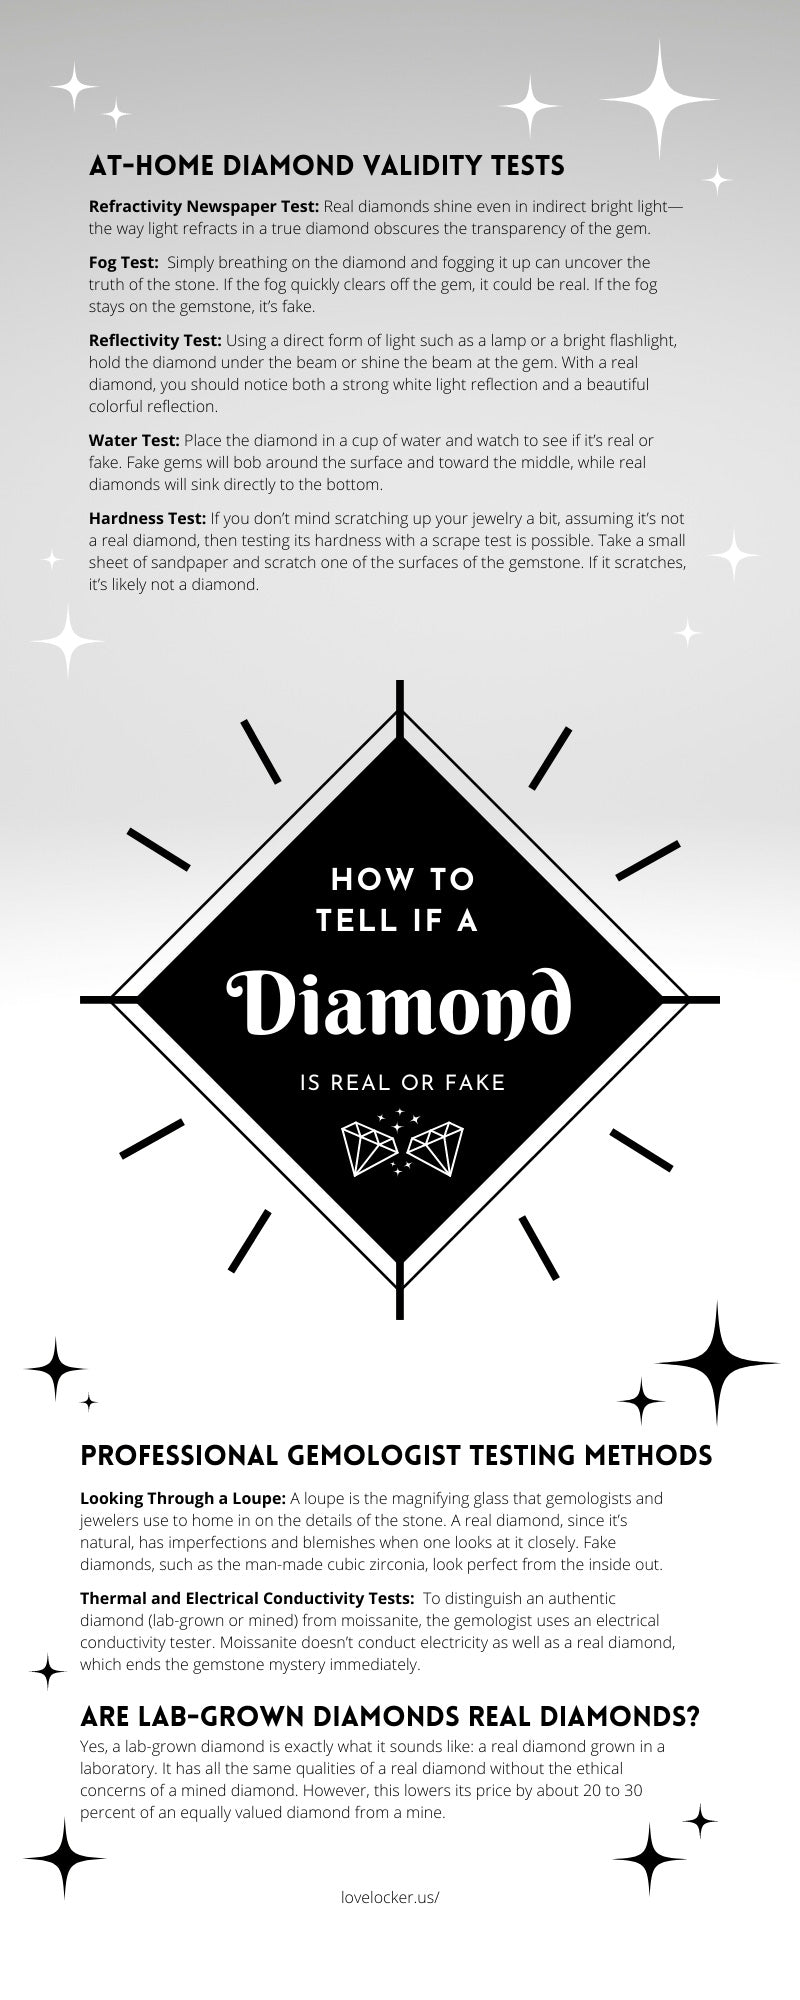 How To Tell If a Diamond Is Real or Fake